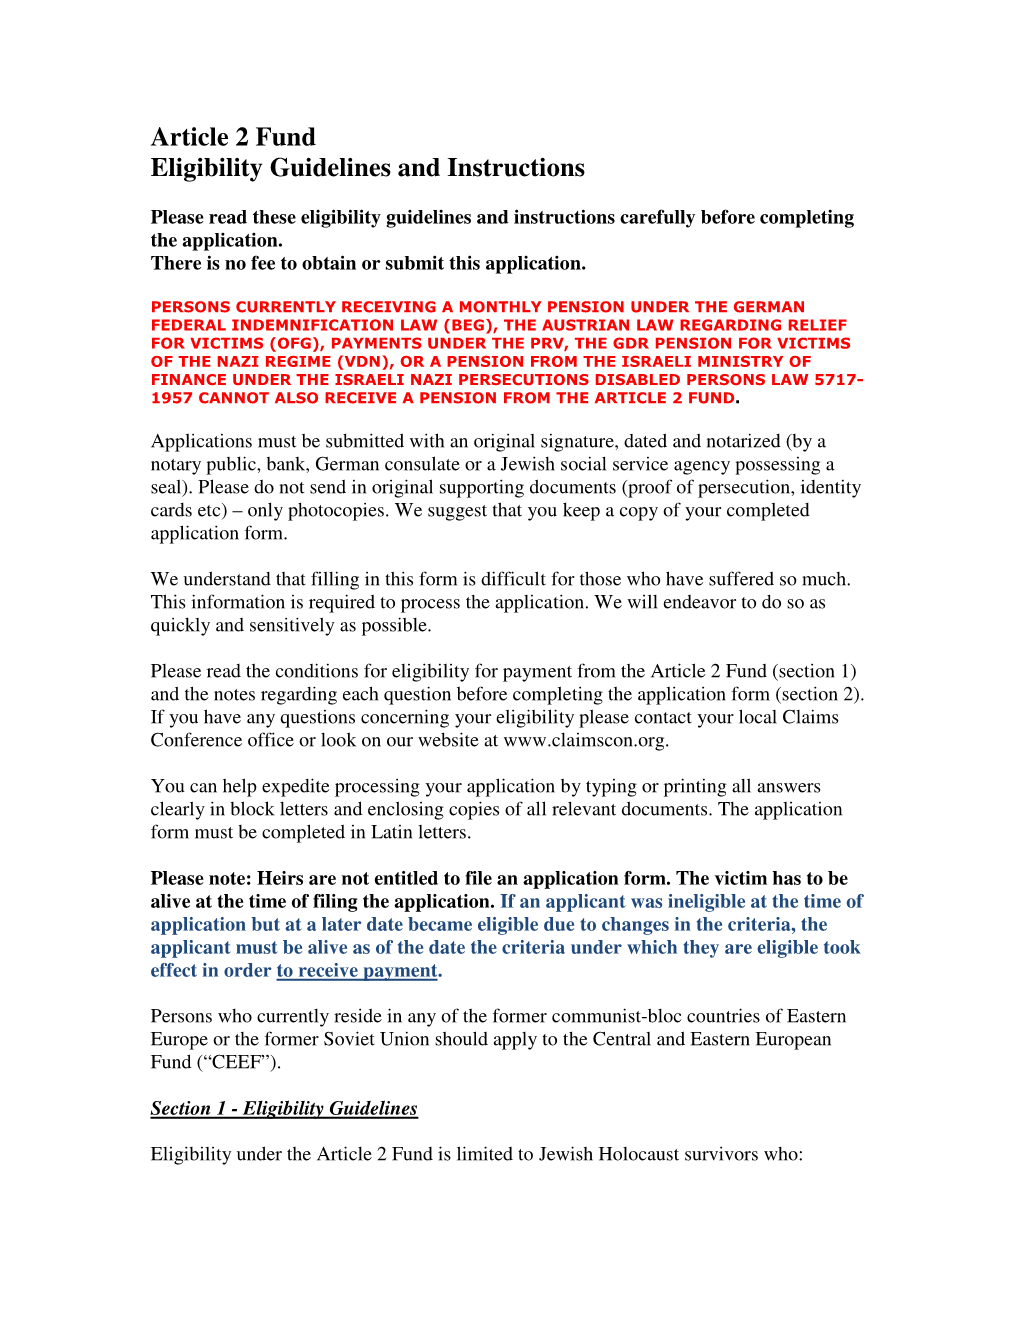 Article 2 Fund Eligibility Guidelines and Instructions